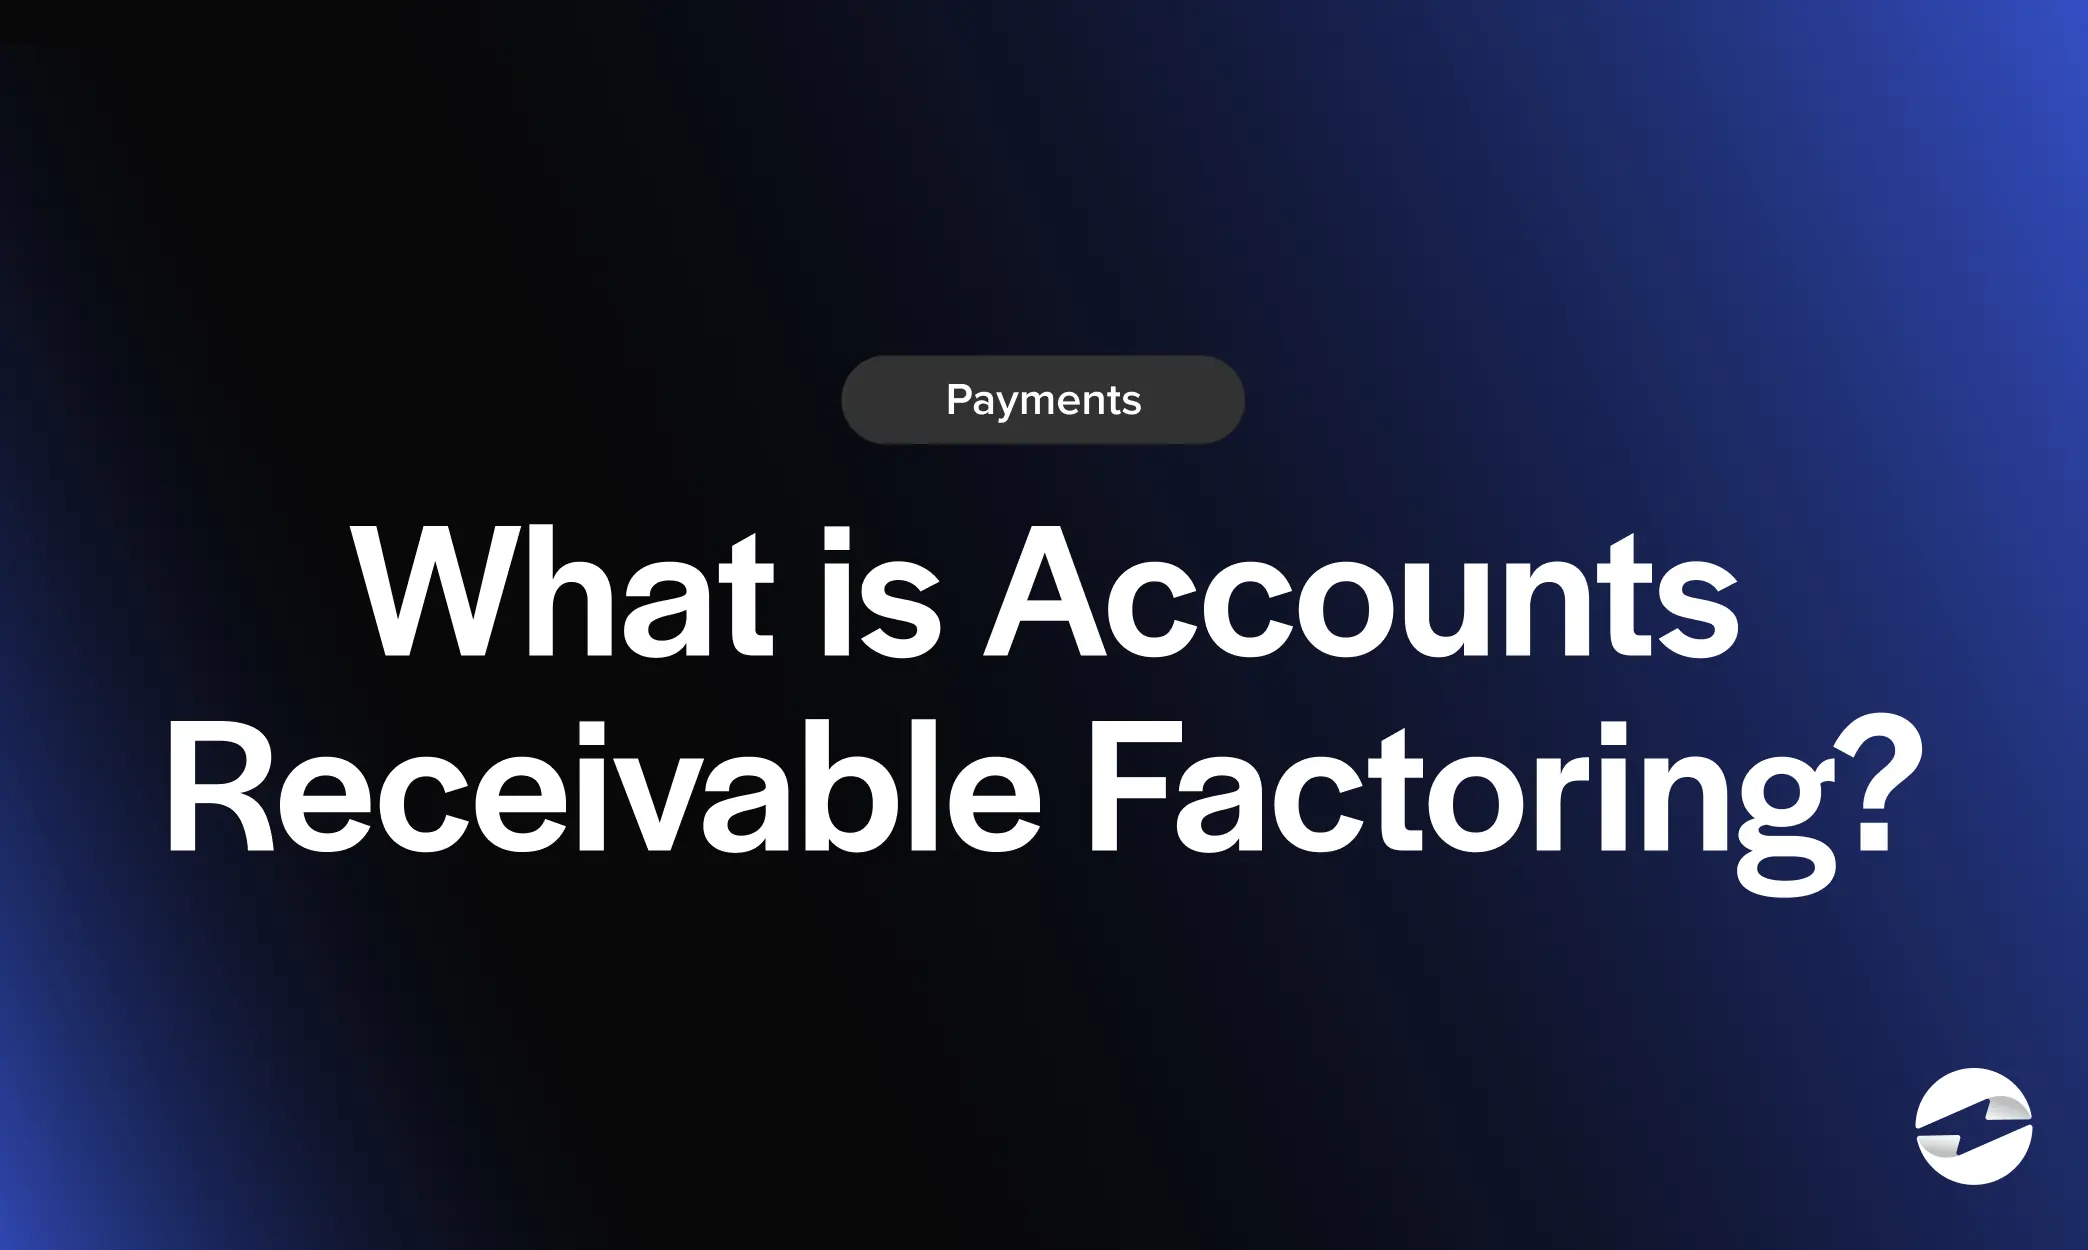 What is Accounts Receivable Factoring